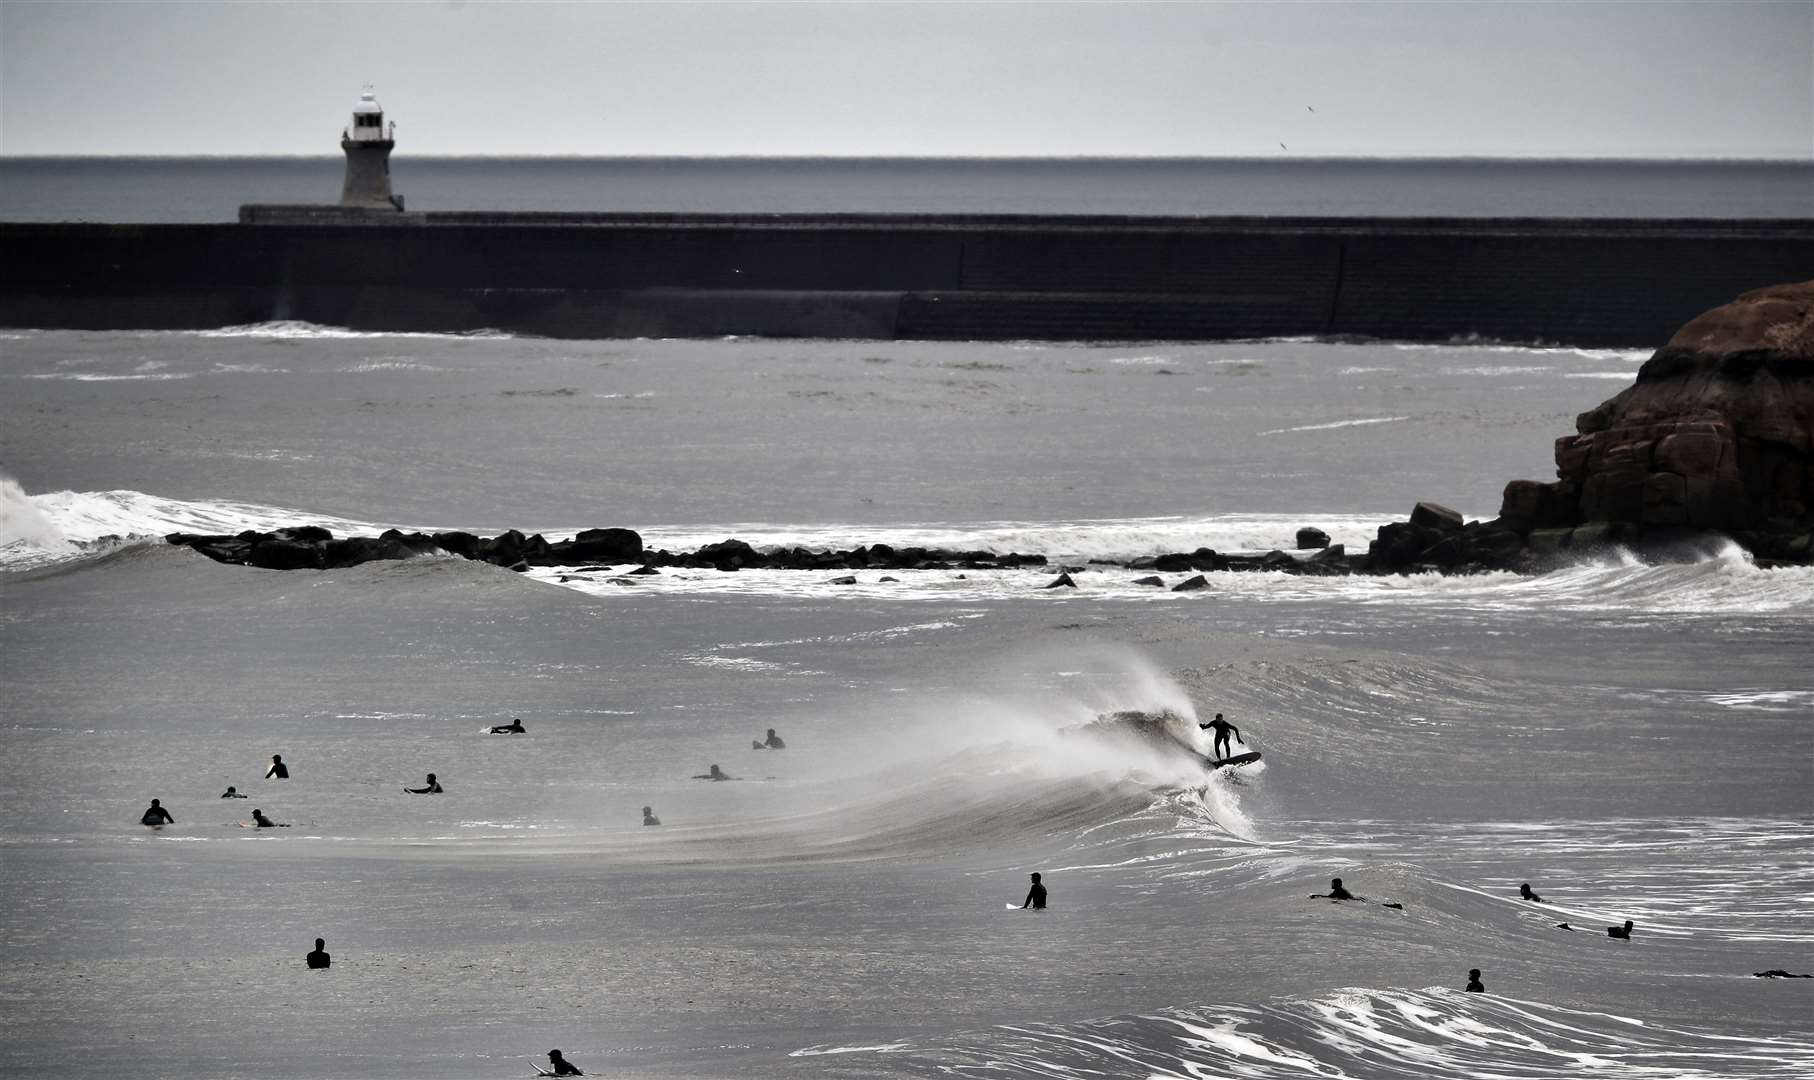 Large numbers of surfers were spotted on the beach at Tynemouth despite the lockdown (Owen Humphreys/PA)